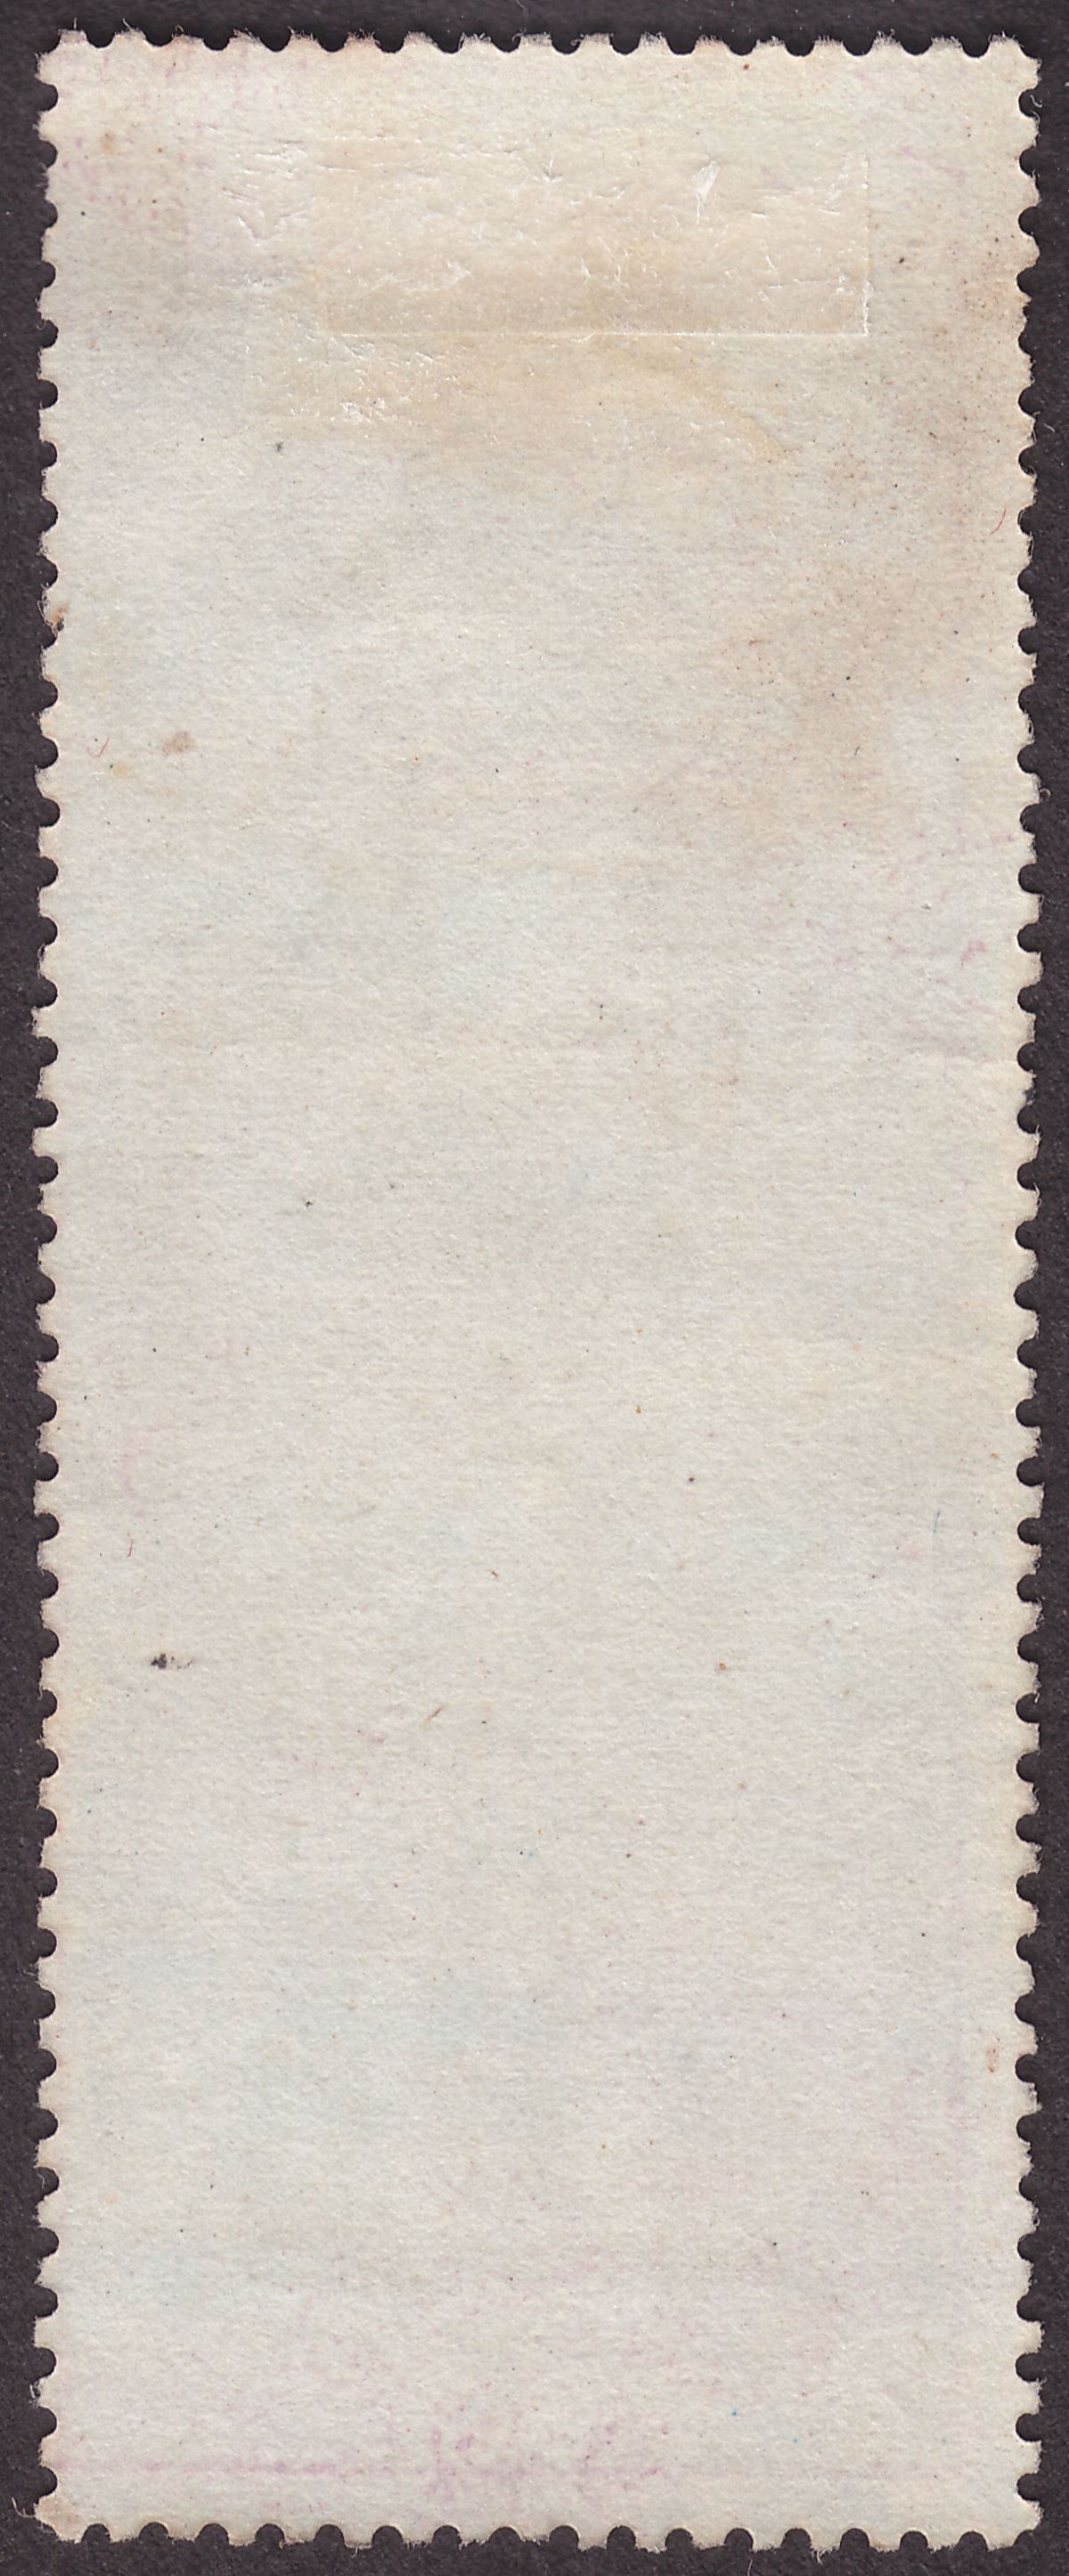 India 1879 QV Revenue Notarial Overprint No Stop on Foreign Bill 1r Mint? BF4var